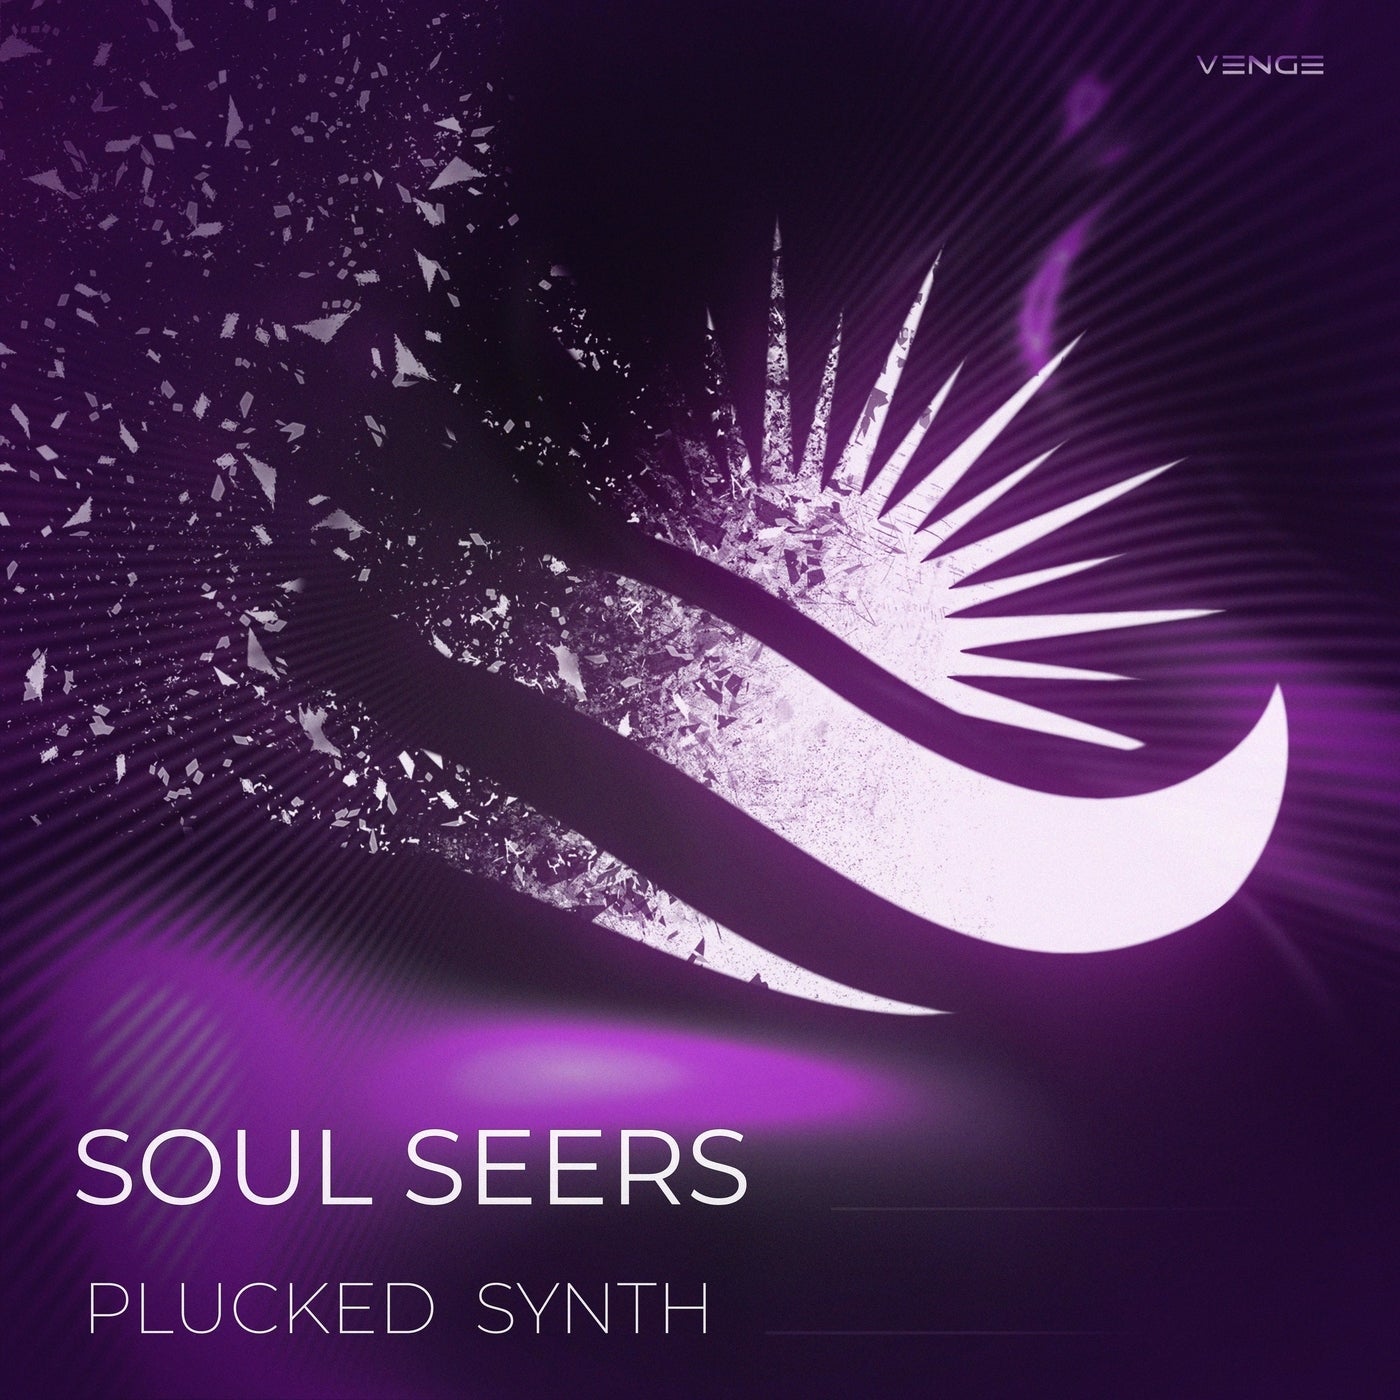 Plucked Synth